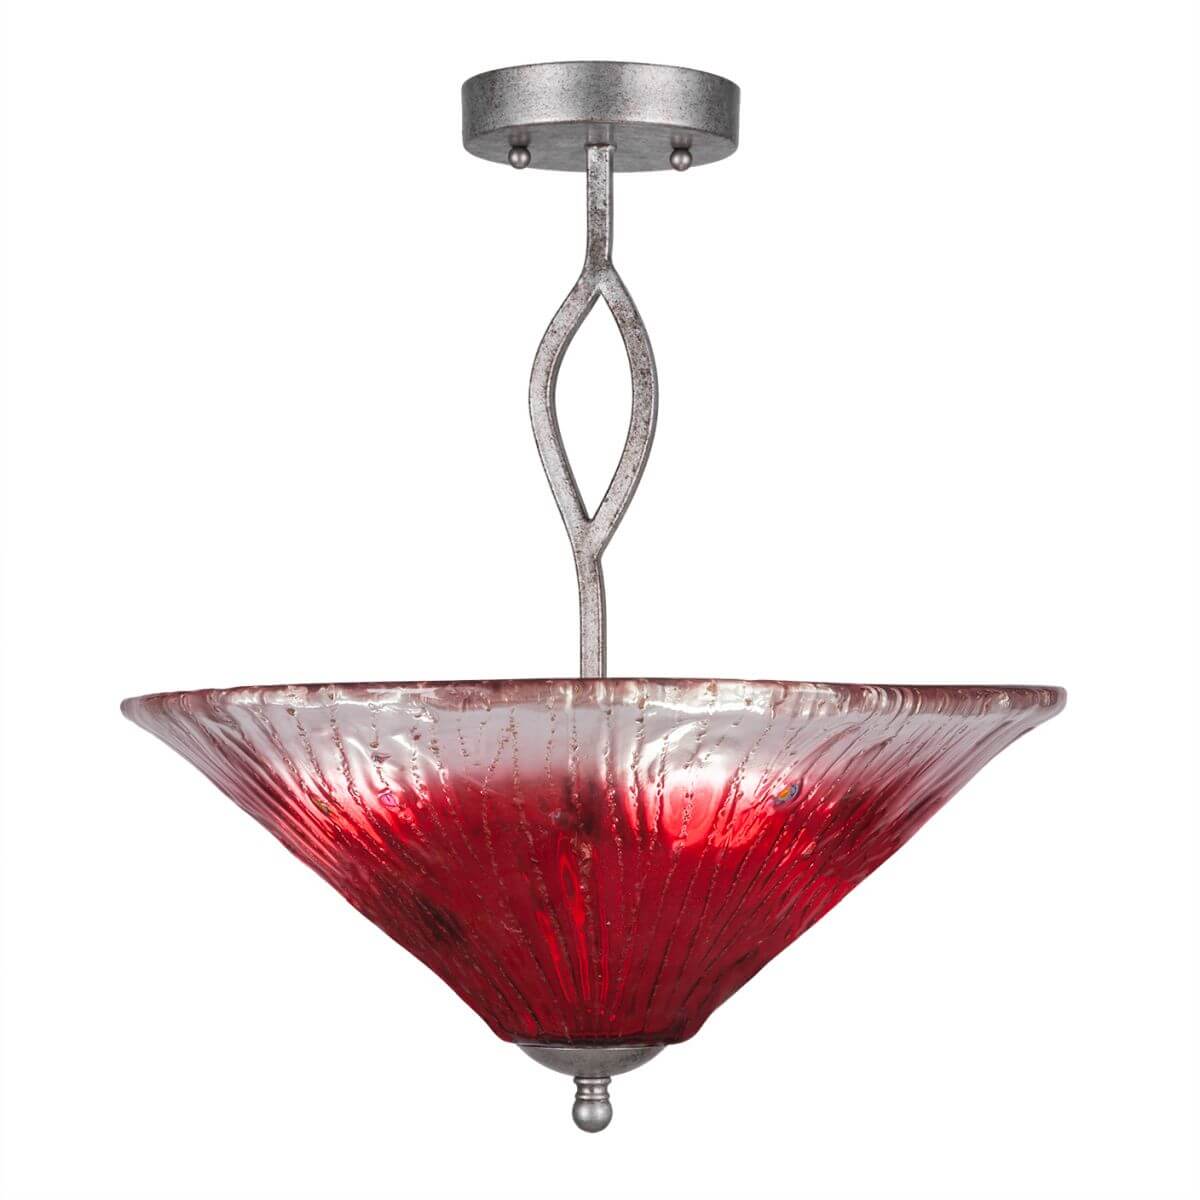 Toltec Lighting 242-AS-716 Revo 3 Light 16 inch Semi-Flush Mount in Aged Silver with 16 inch Raspberry Crystal Glass